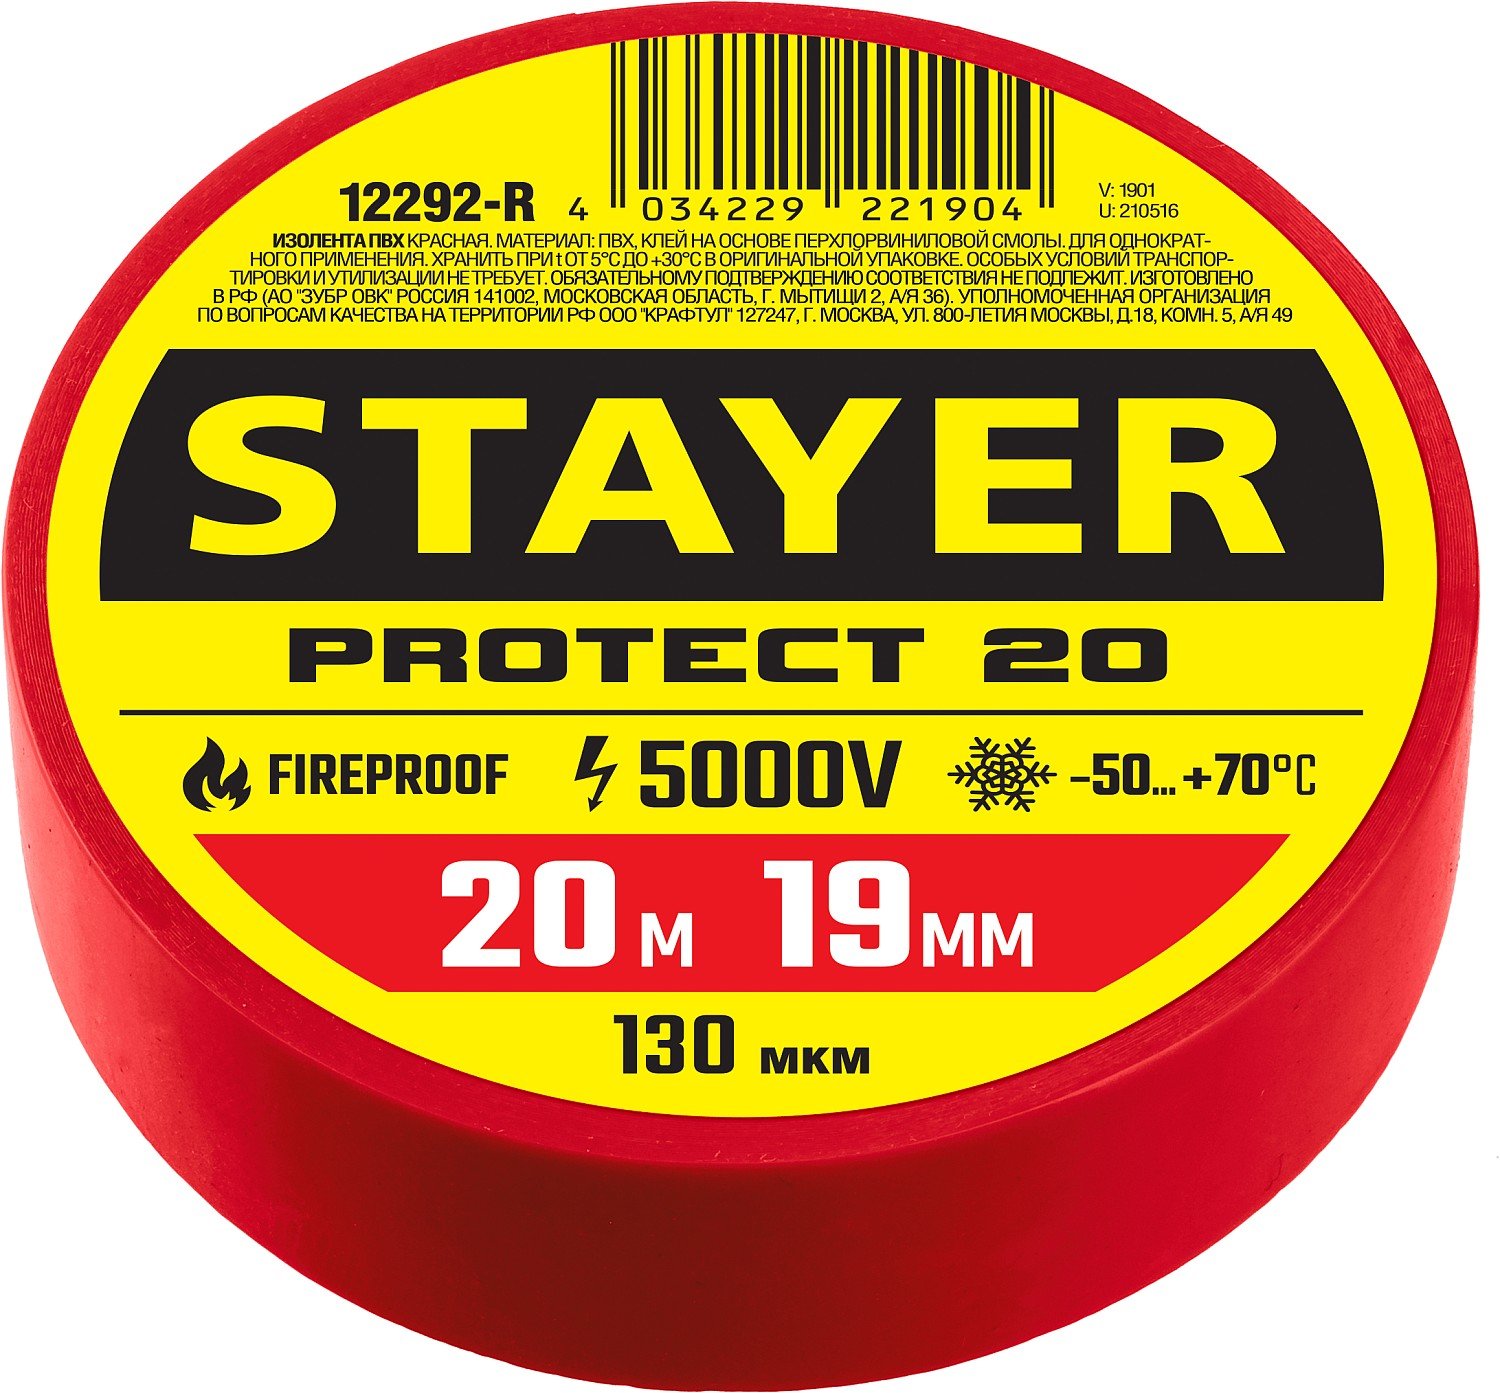    STAYER Protect-20 19   20   (12292-R)